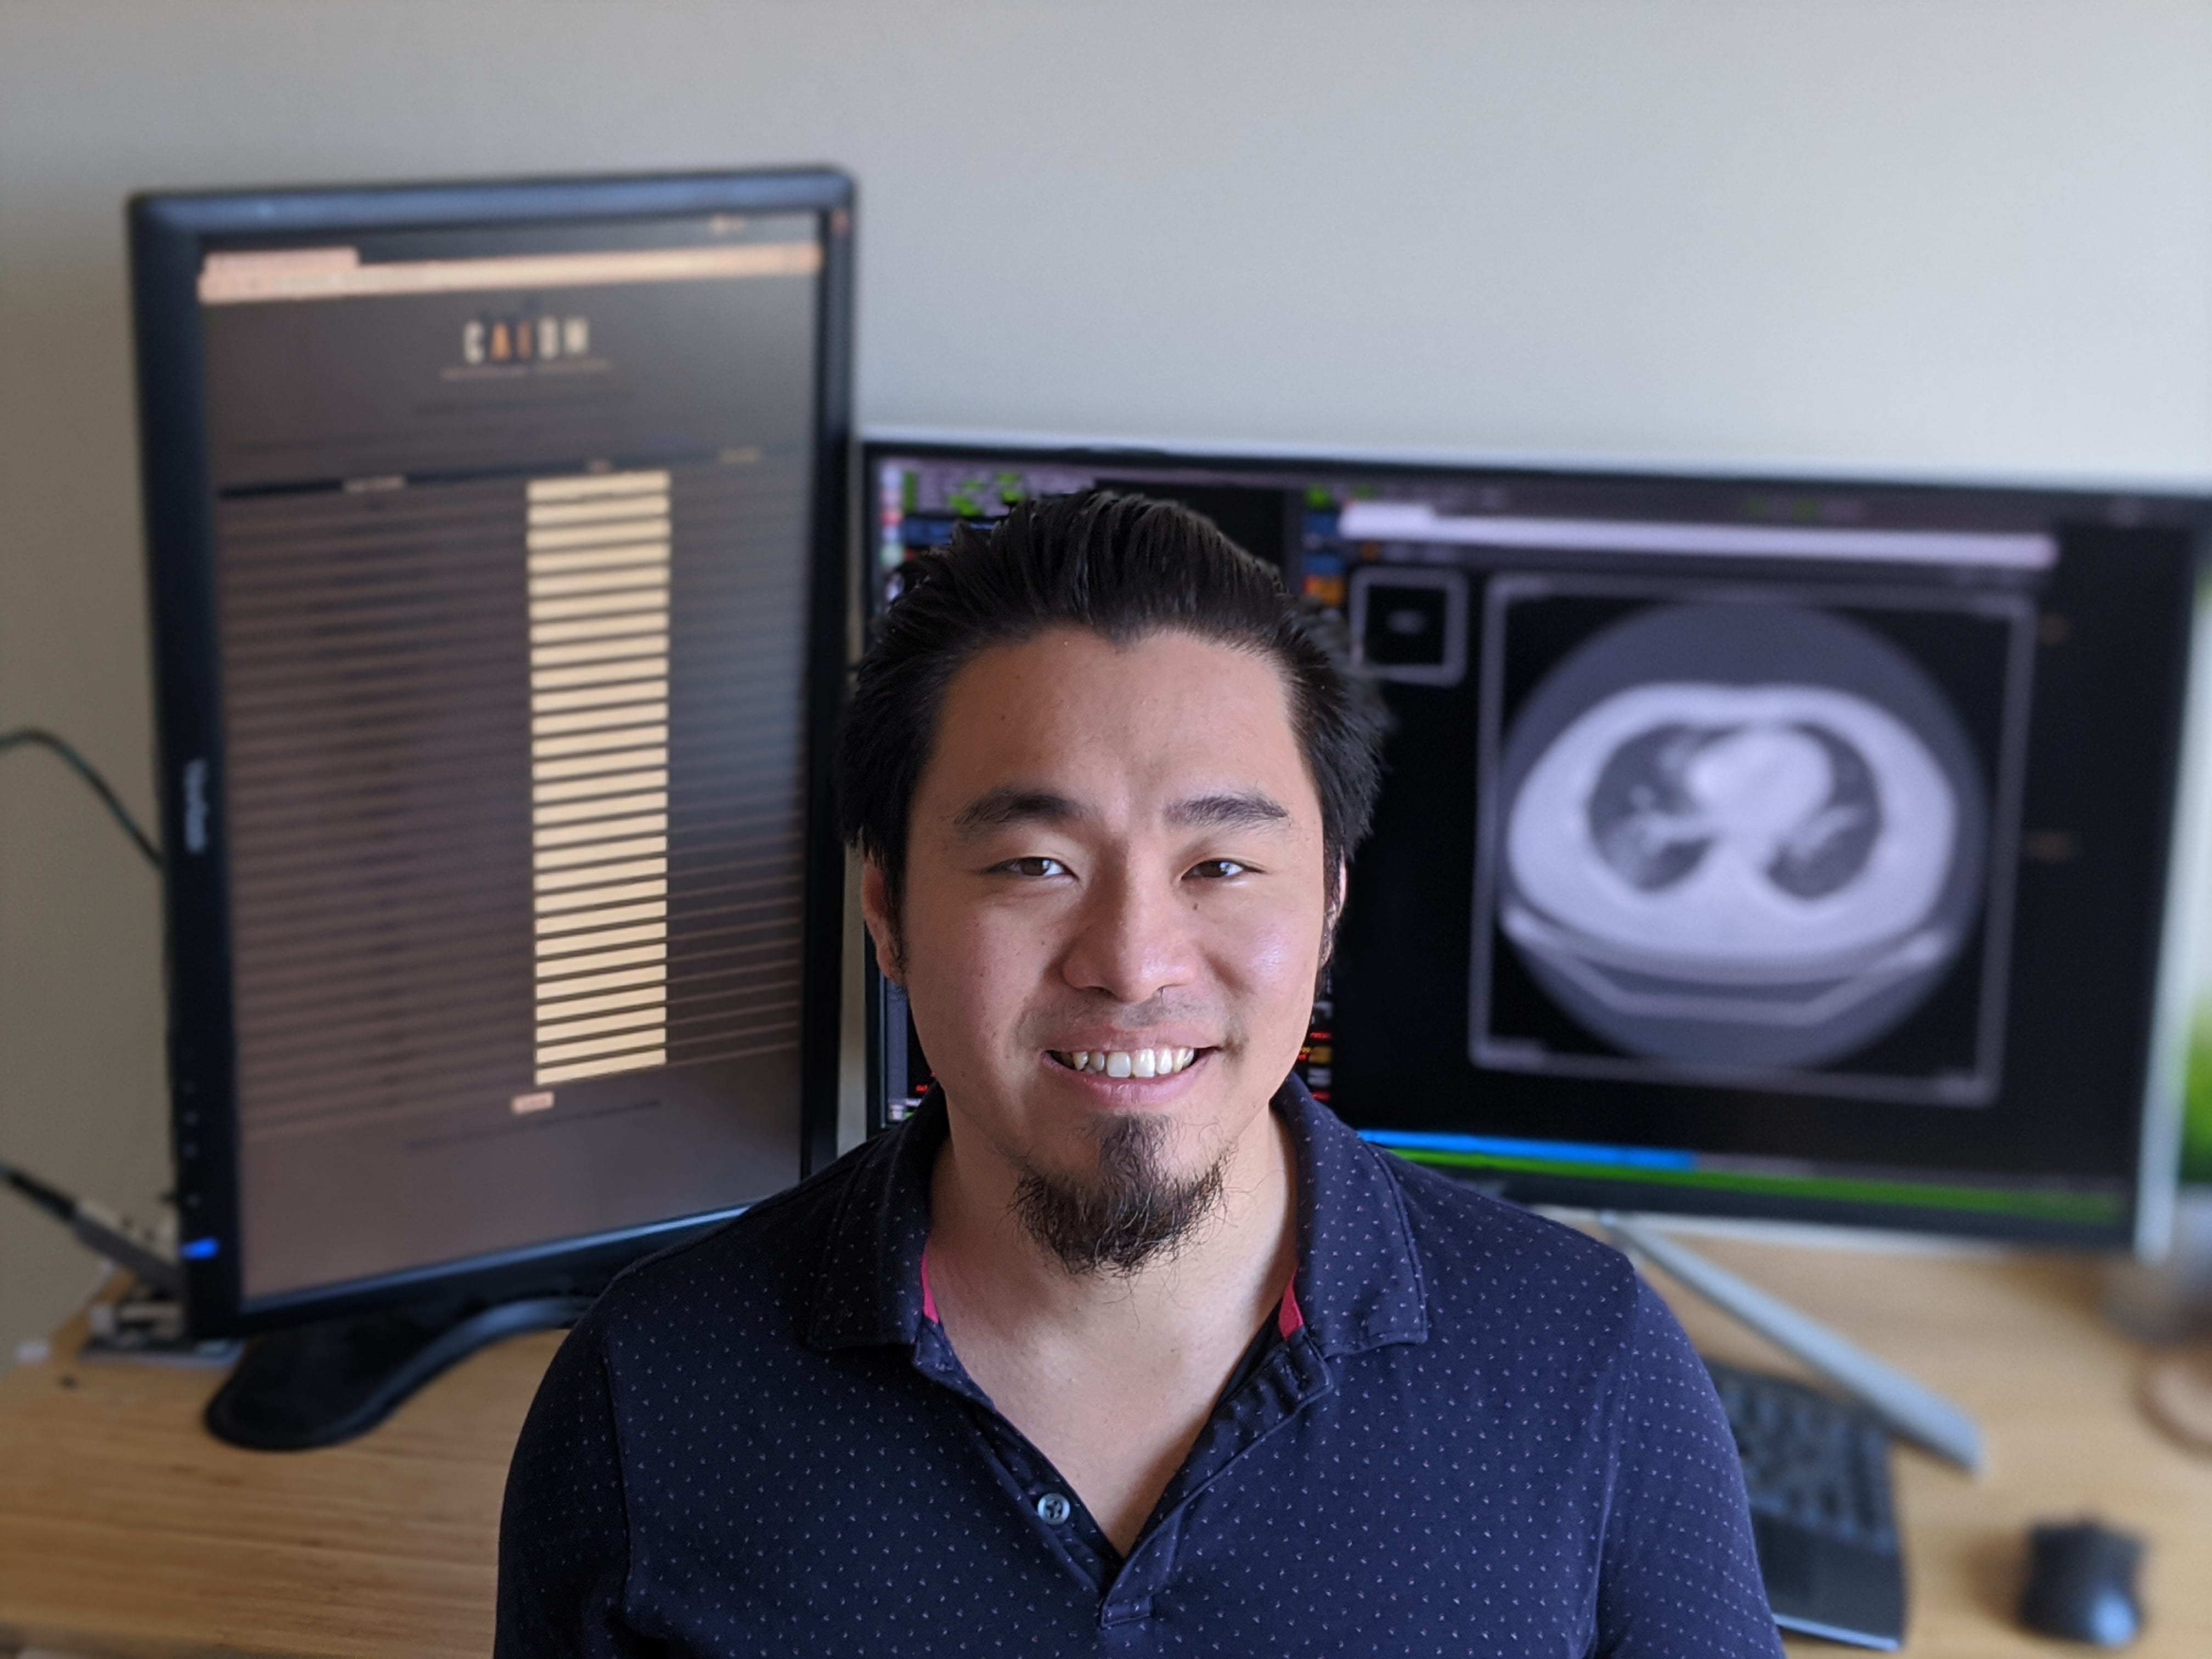 Dr. Peter Chang, a UCI Health neuroradiologist who designed the algorithm and is co-director of UCI’s Center for Artificial Intelligence in Diagnostic Medicine said "In the course of just a month or so, we’ve gotten the data, built the model, tested it on some cohorts and launched it on a website.”